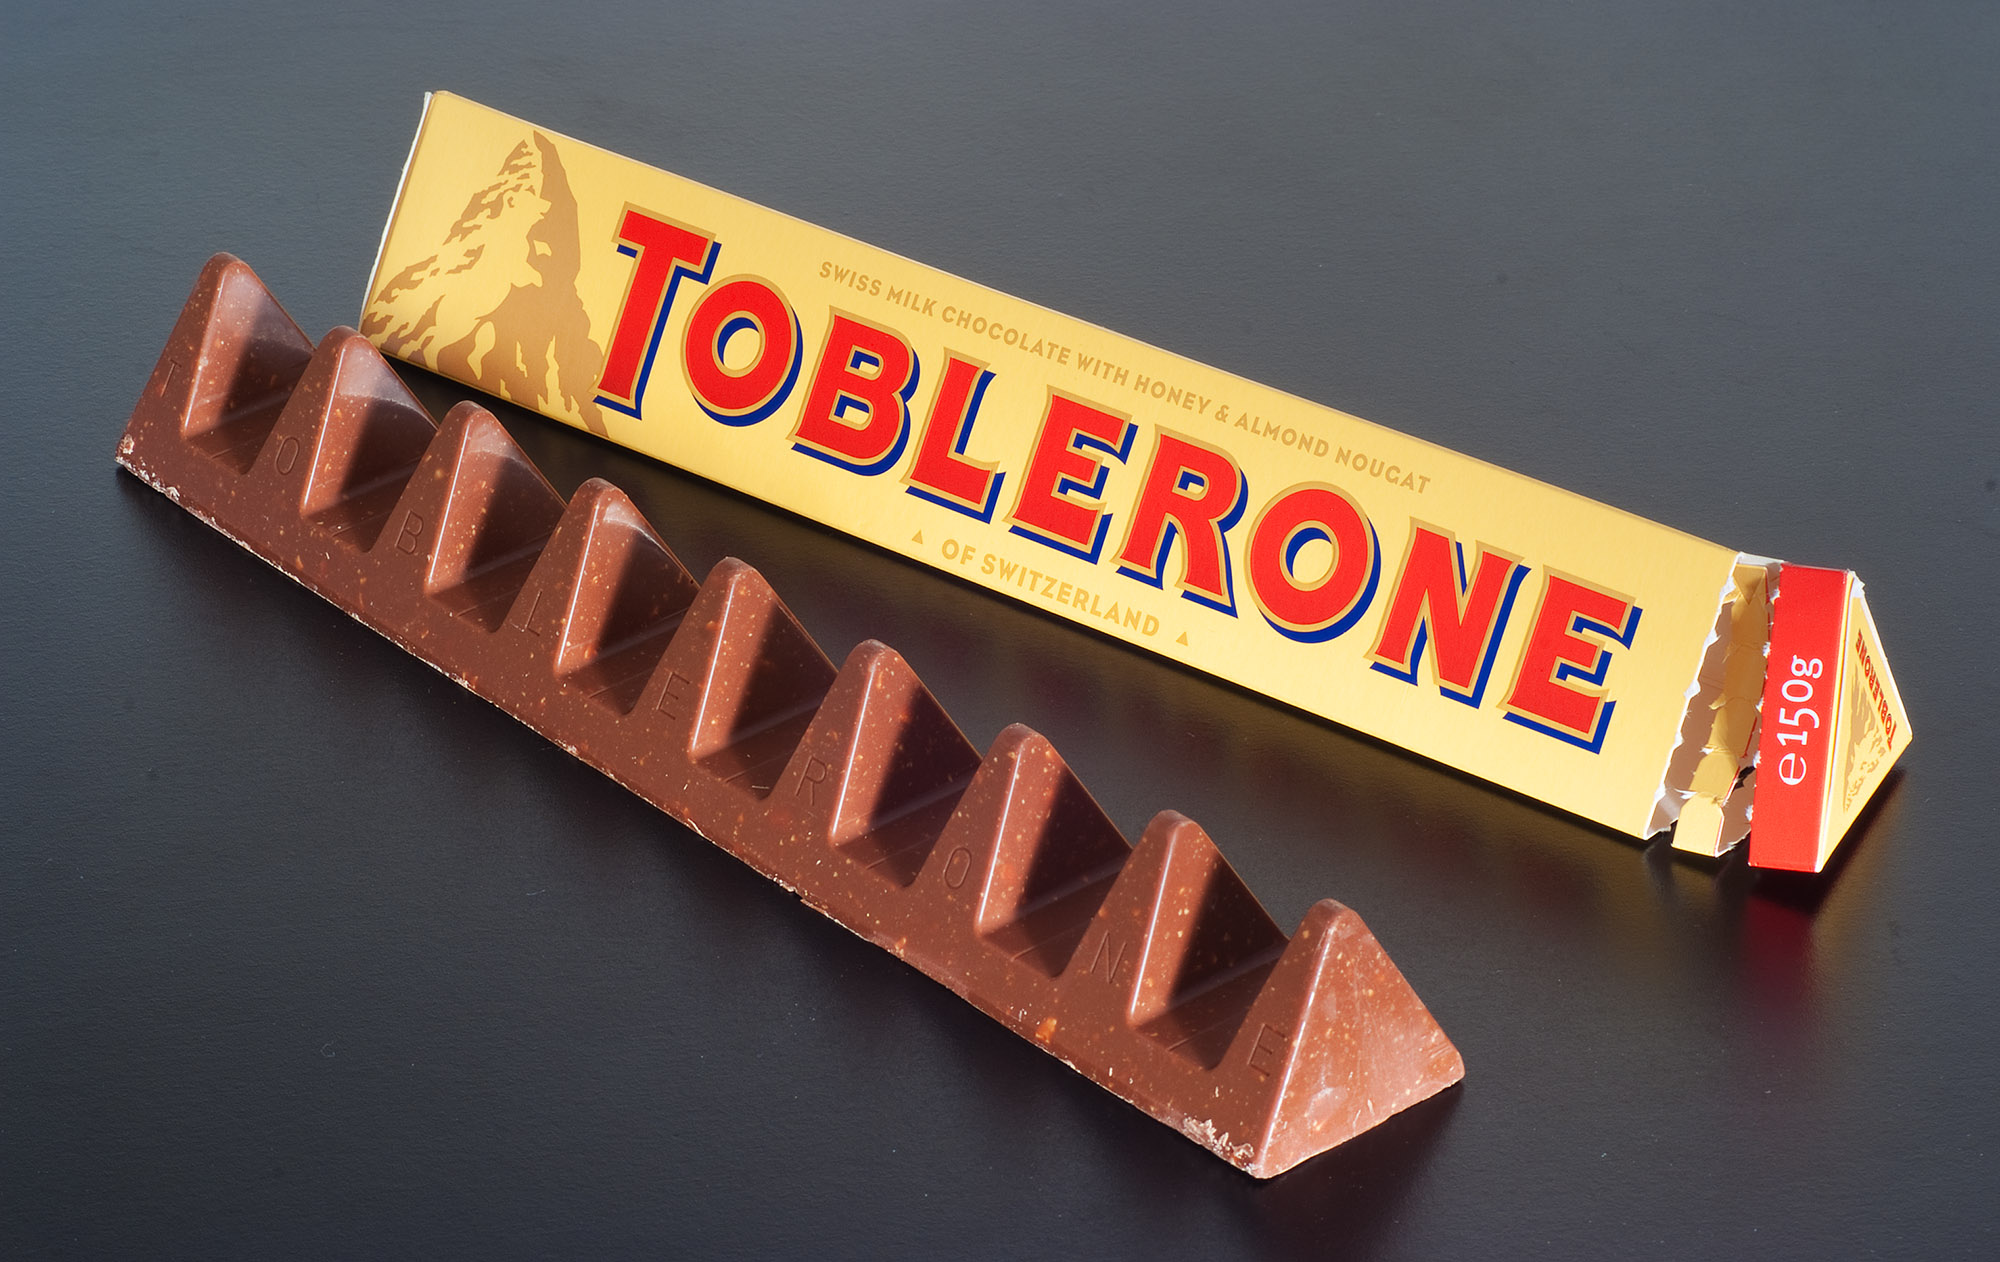 Shrinkflation — Toblerone bar from the United Kingdom with larger gaps between peaks, using 10% less chocolate.